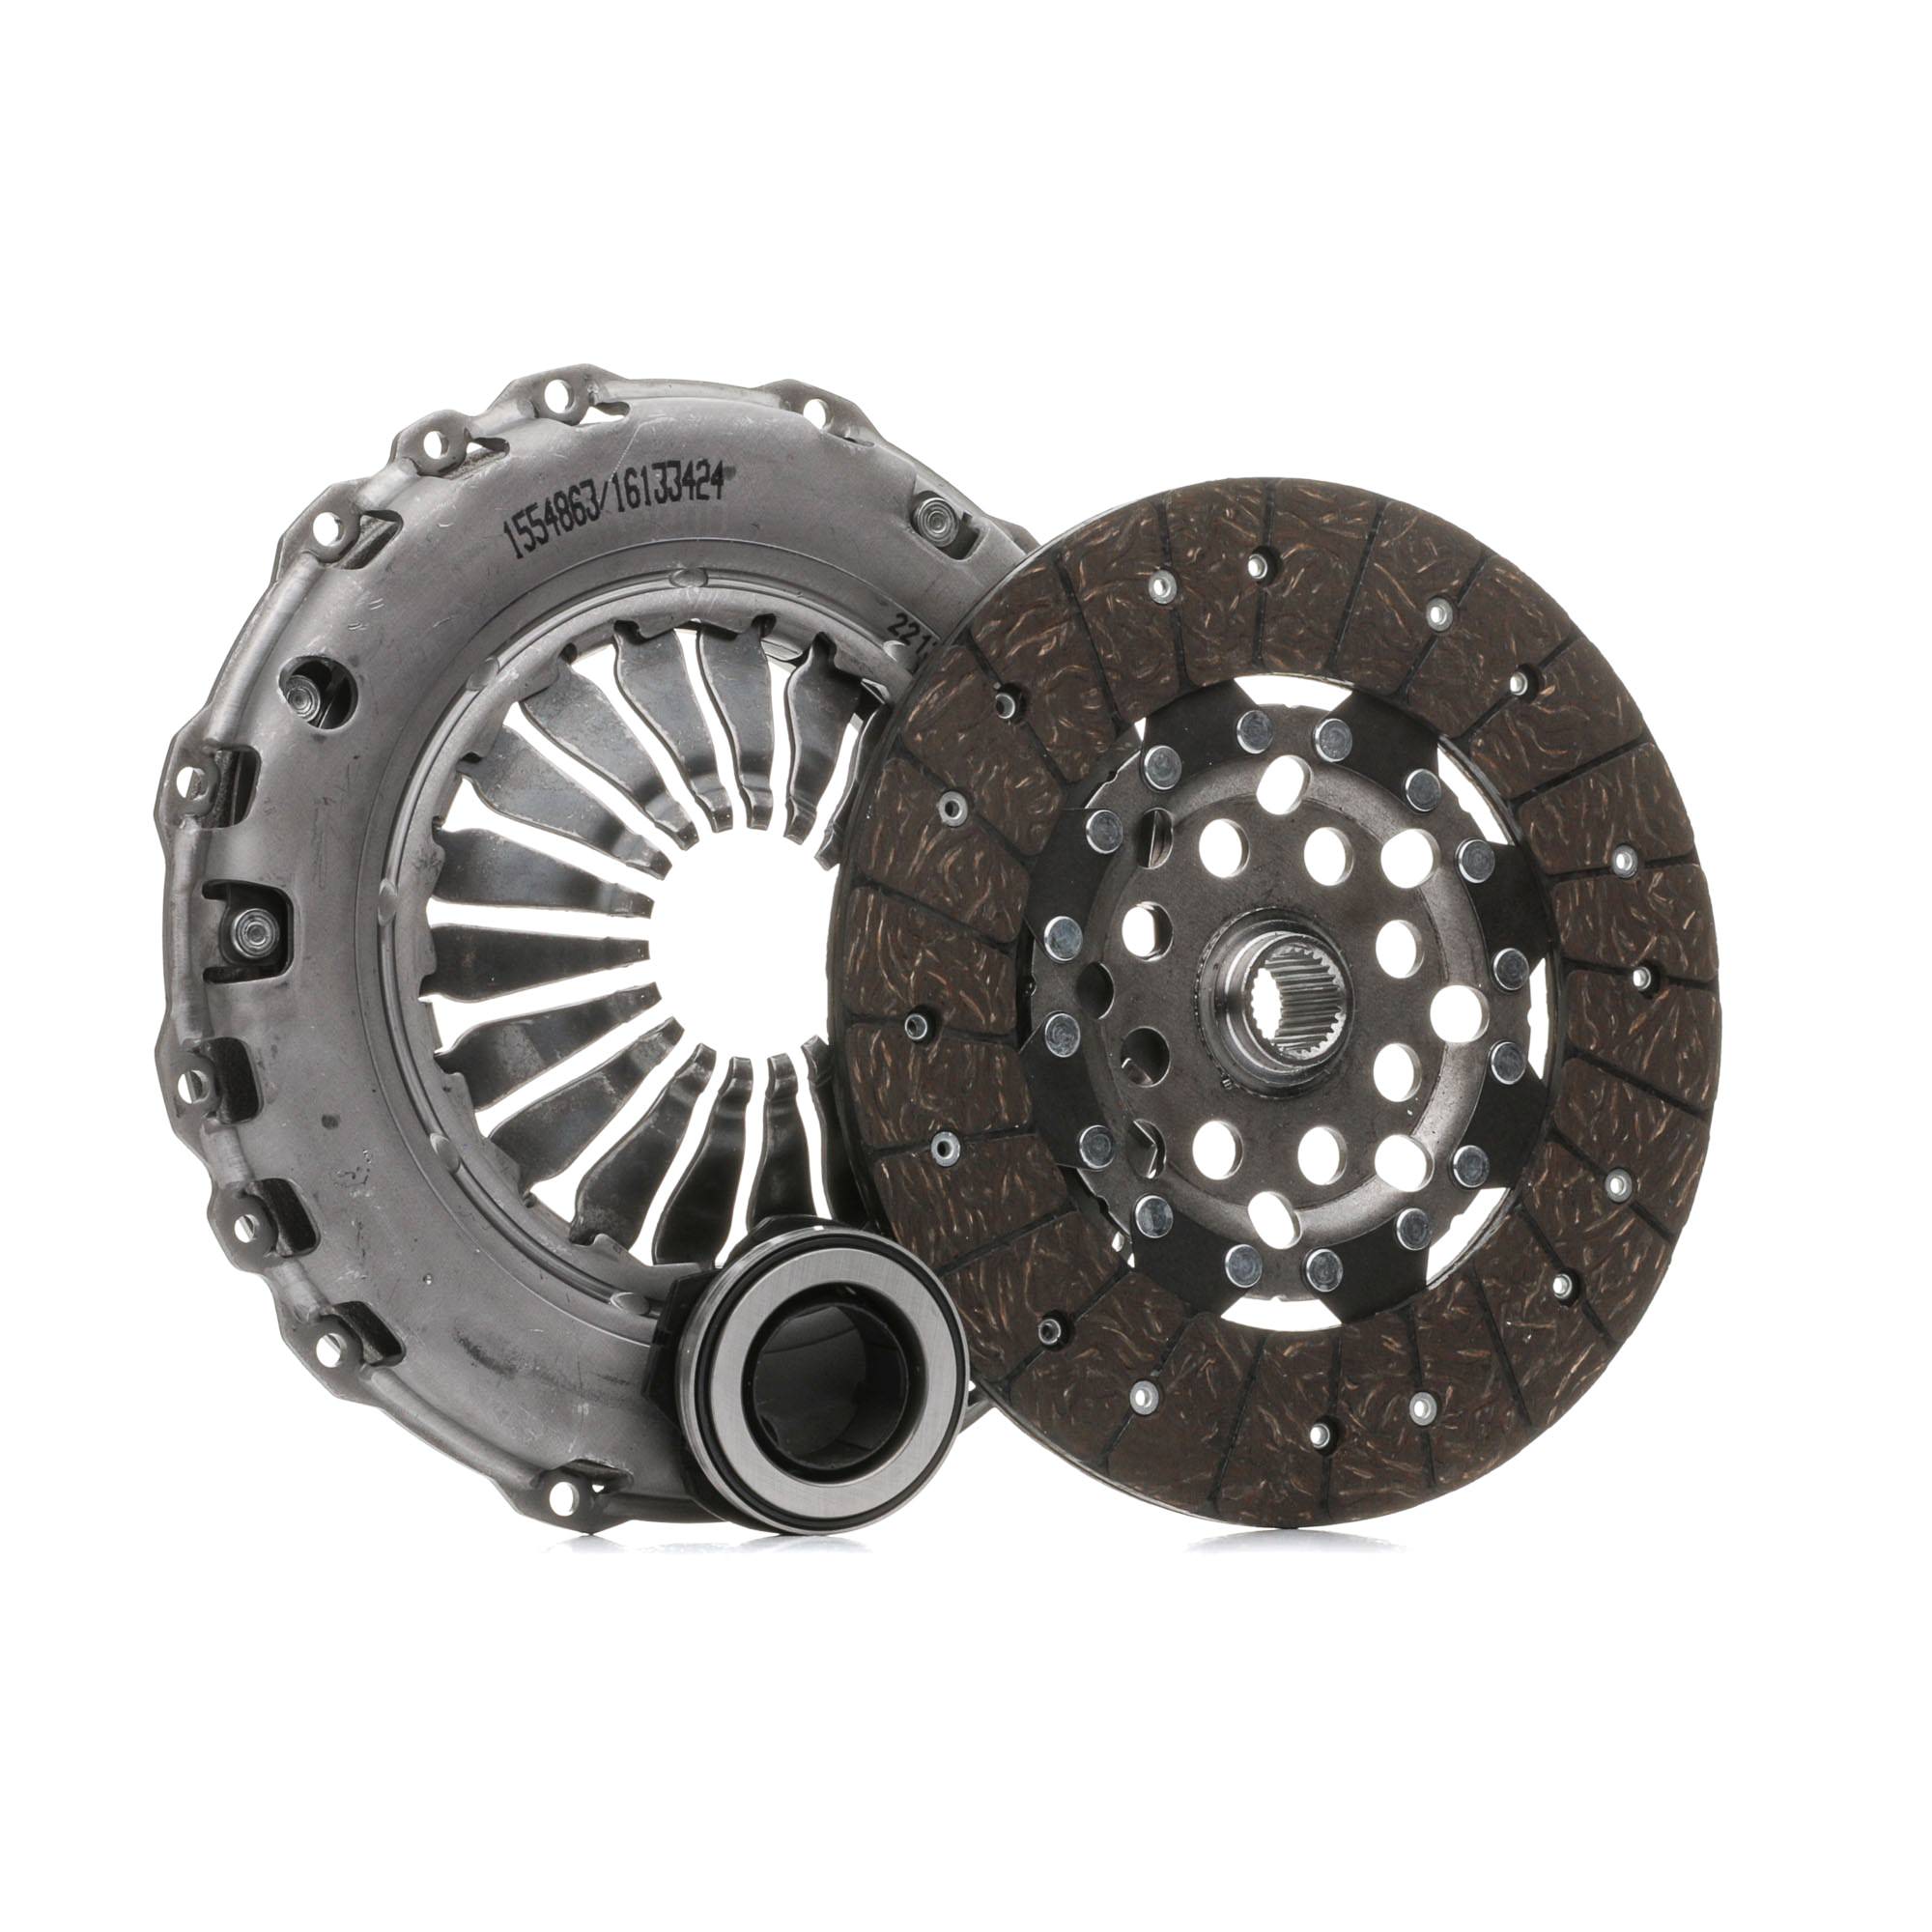 RIDEX 479C3038 Clutch kit for engines with dual-mass flywheel, with clutch release bearing, with clutch disc, Check and replace dual-mass flywheel if necessary., 220mm